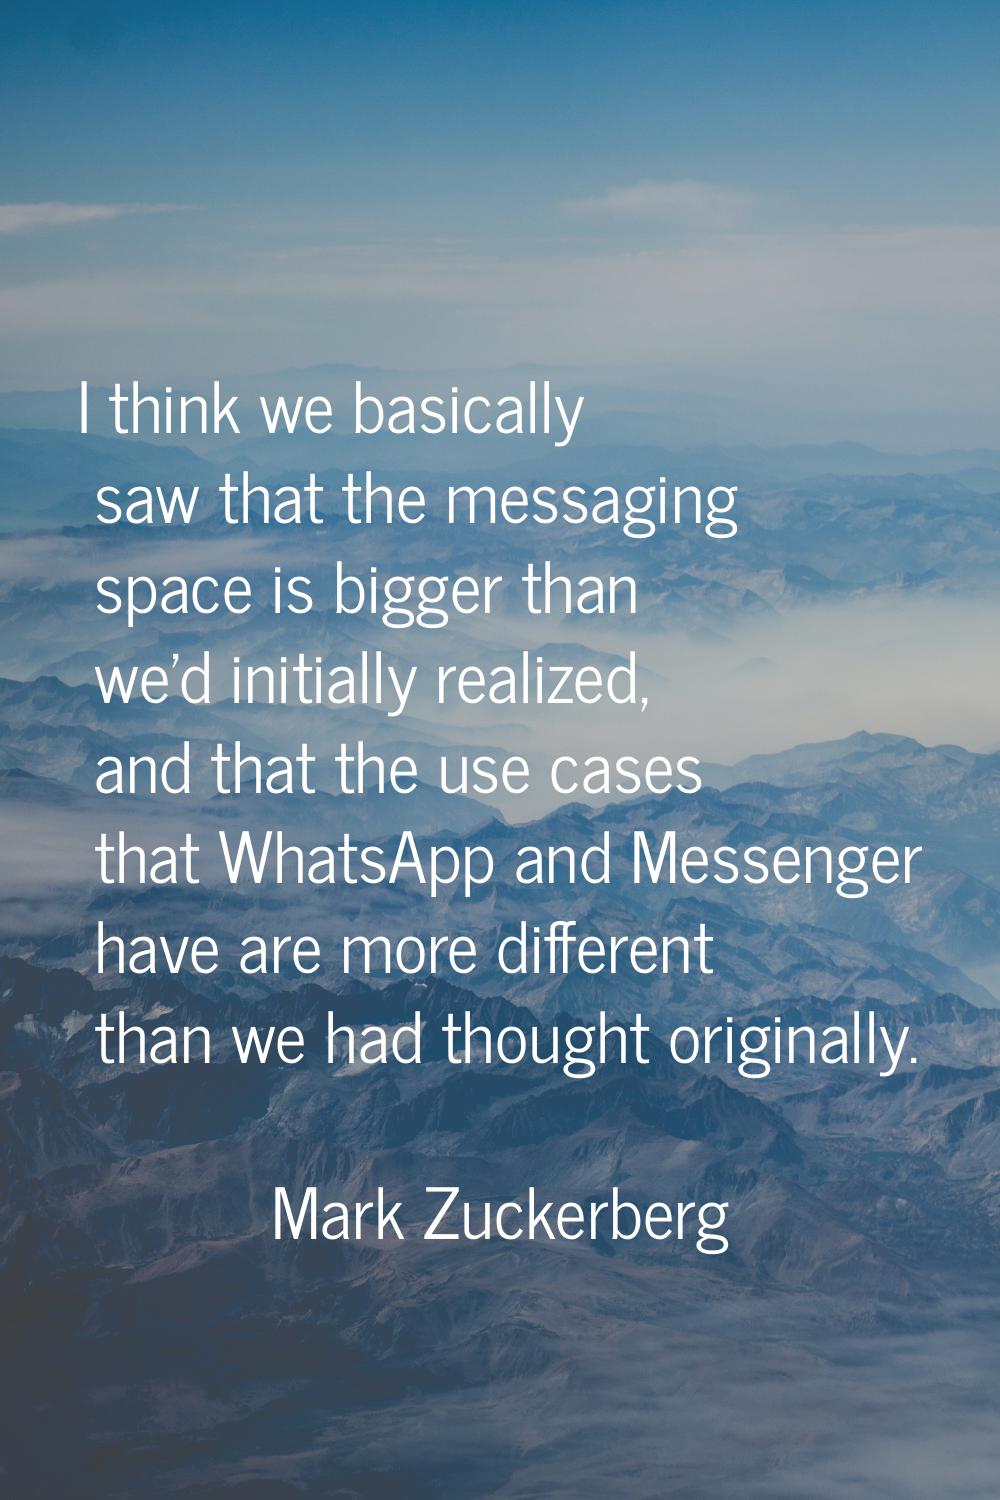 I think we basically saw that the messaging space is bigger than we'd initially realized, and that 